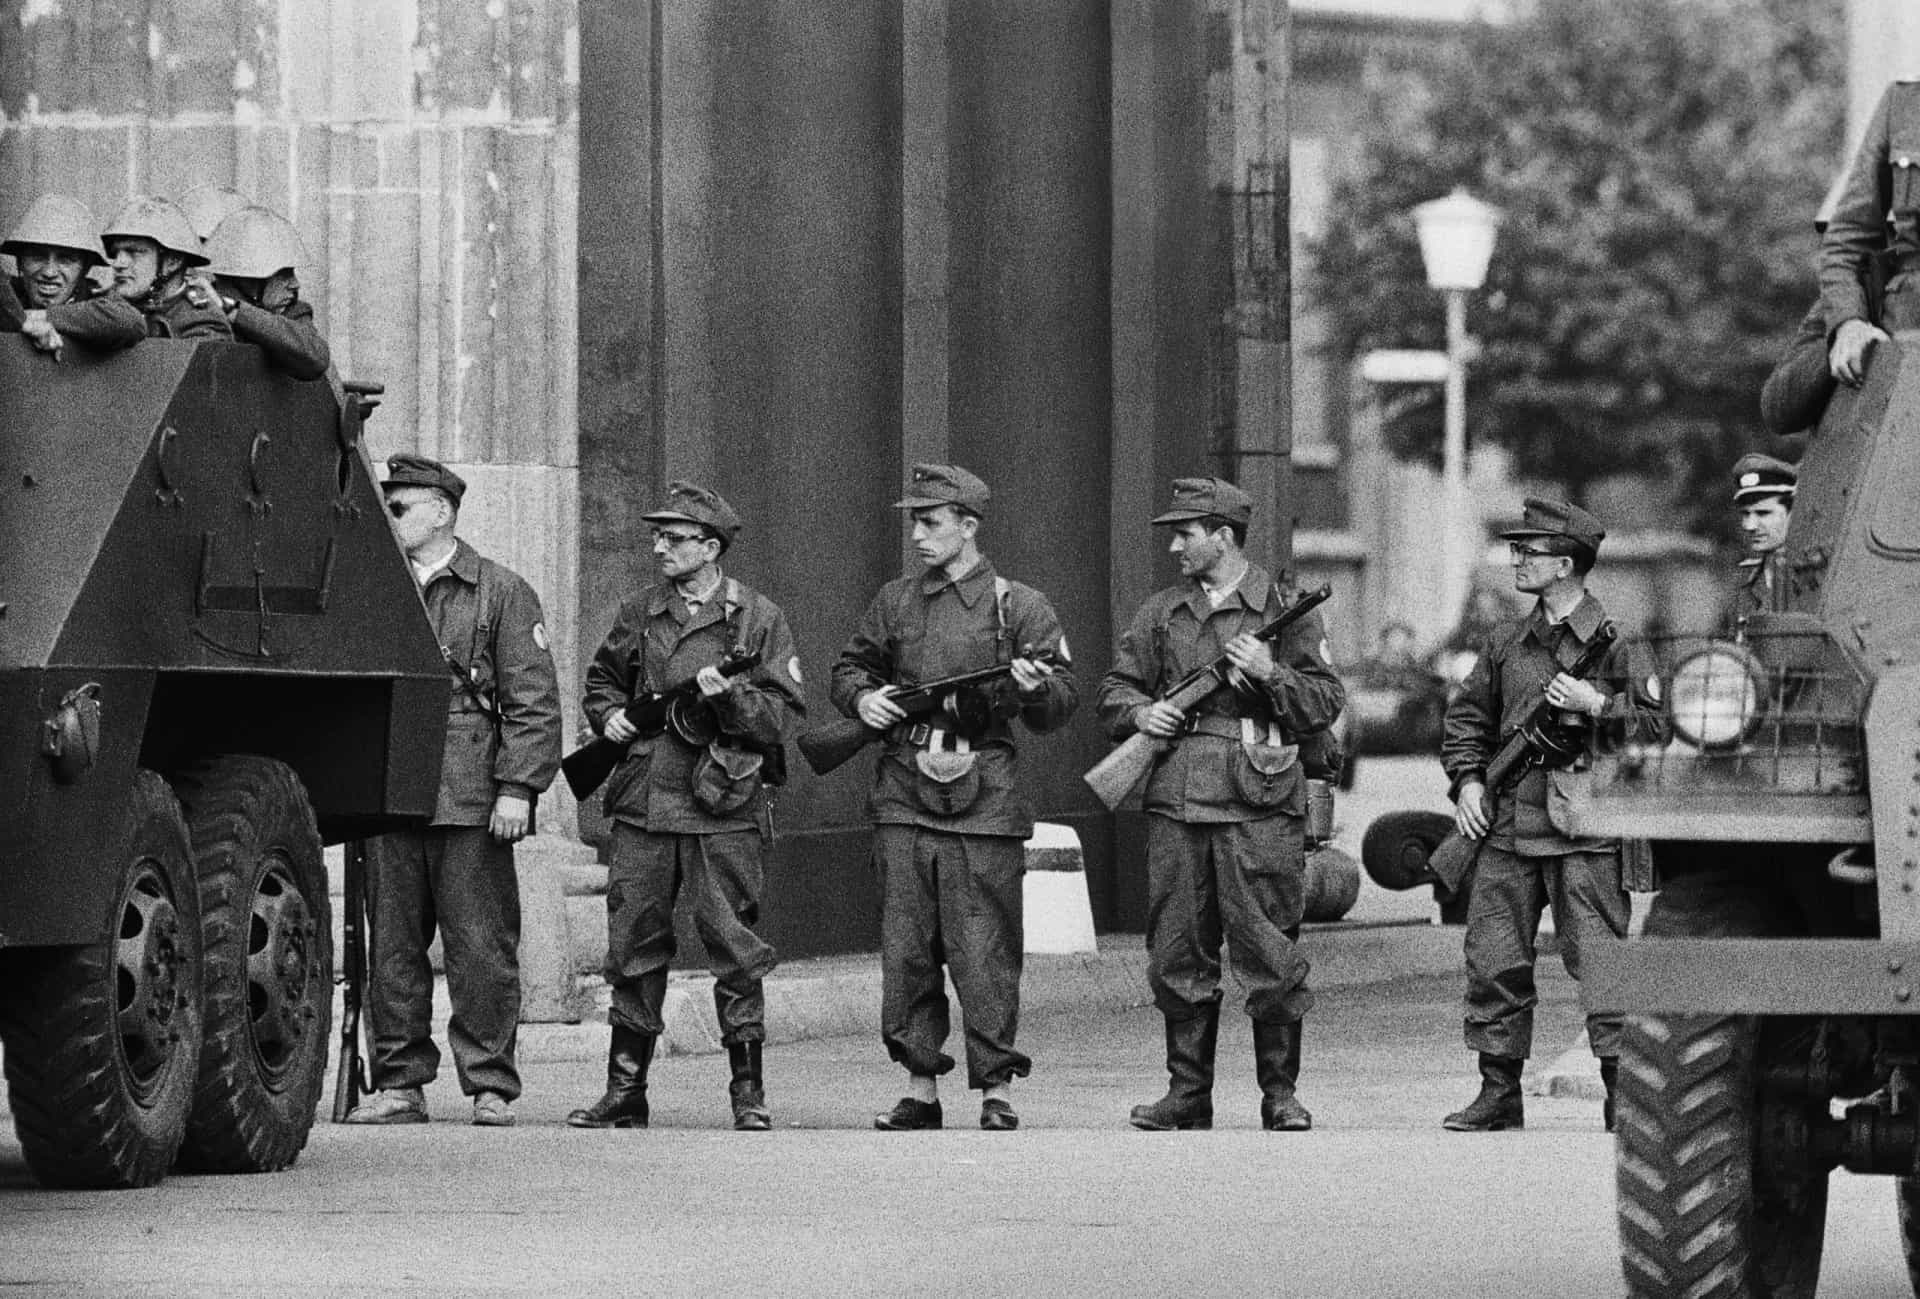 <p>Pictured: members of the East German paramilitary organization Combat Group of the Working Class guard the border crossing near the Brandenburg Gate.</p><p>You may also like: <a href="https://www.starsinsider.com/n/385052?utm_source=msn.com&utm_medium=display&utm_campaign=referral_description&utm_content=509600en-us">Things you've been doing wrong all this time</a></p>